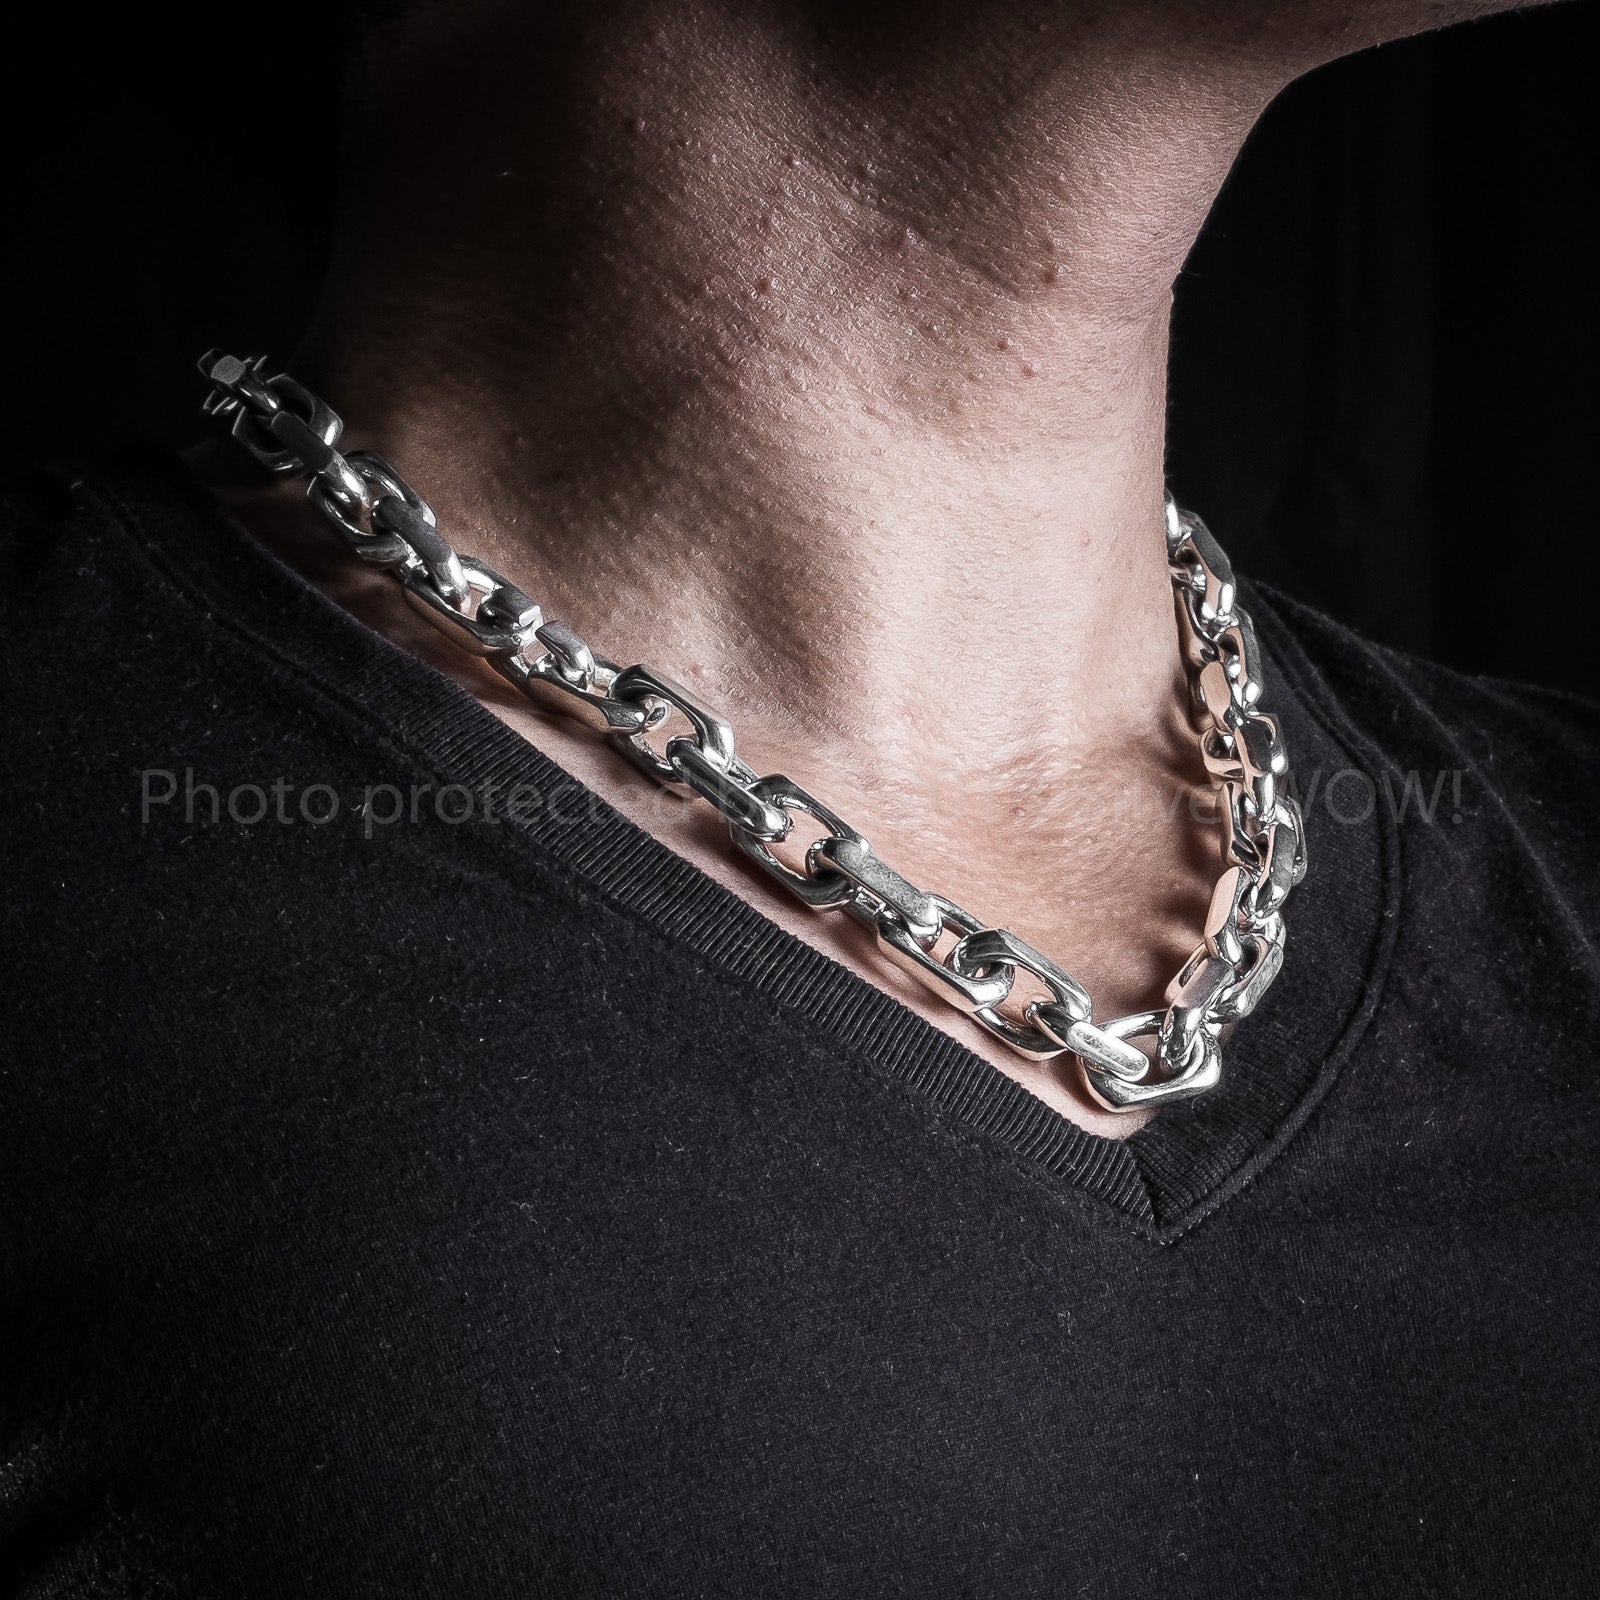 Best chains and necklaces for men 2022: Silver, gold, chunky